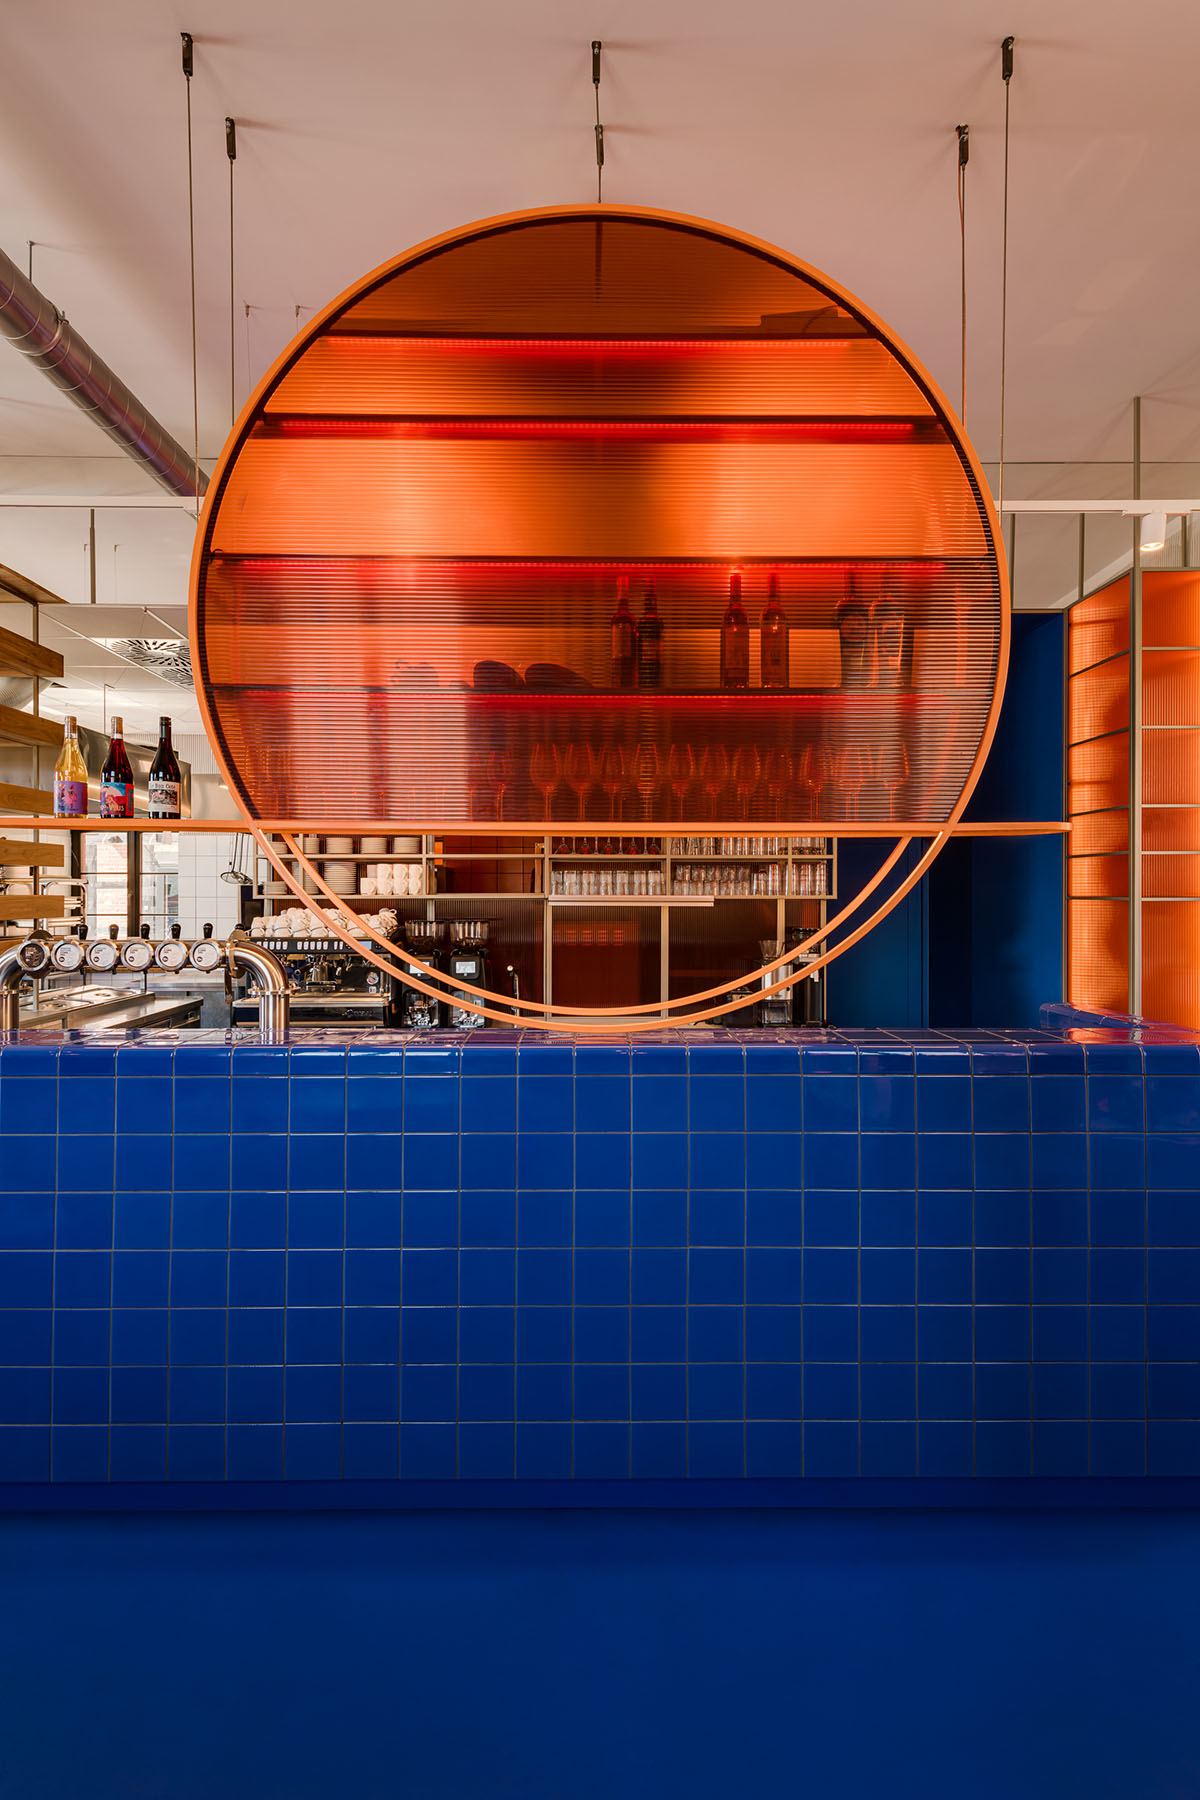 Znamy się creates club-like atmosphere in pastry shop featuring orange-tinted circular element 